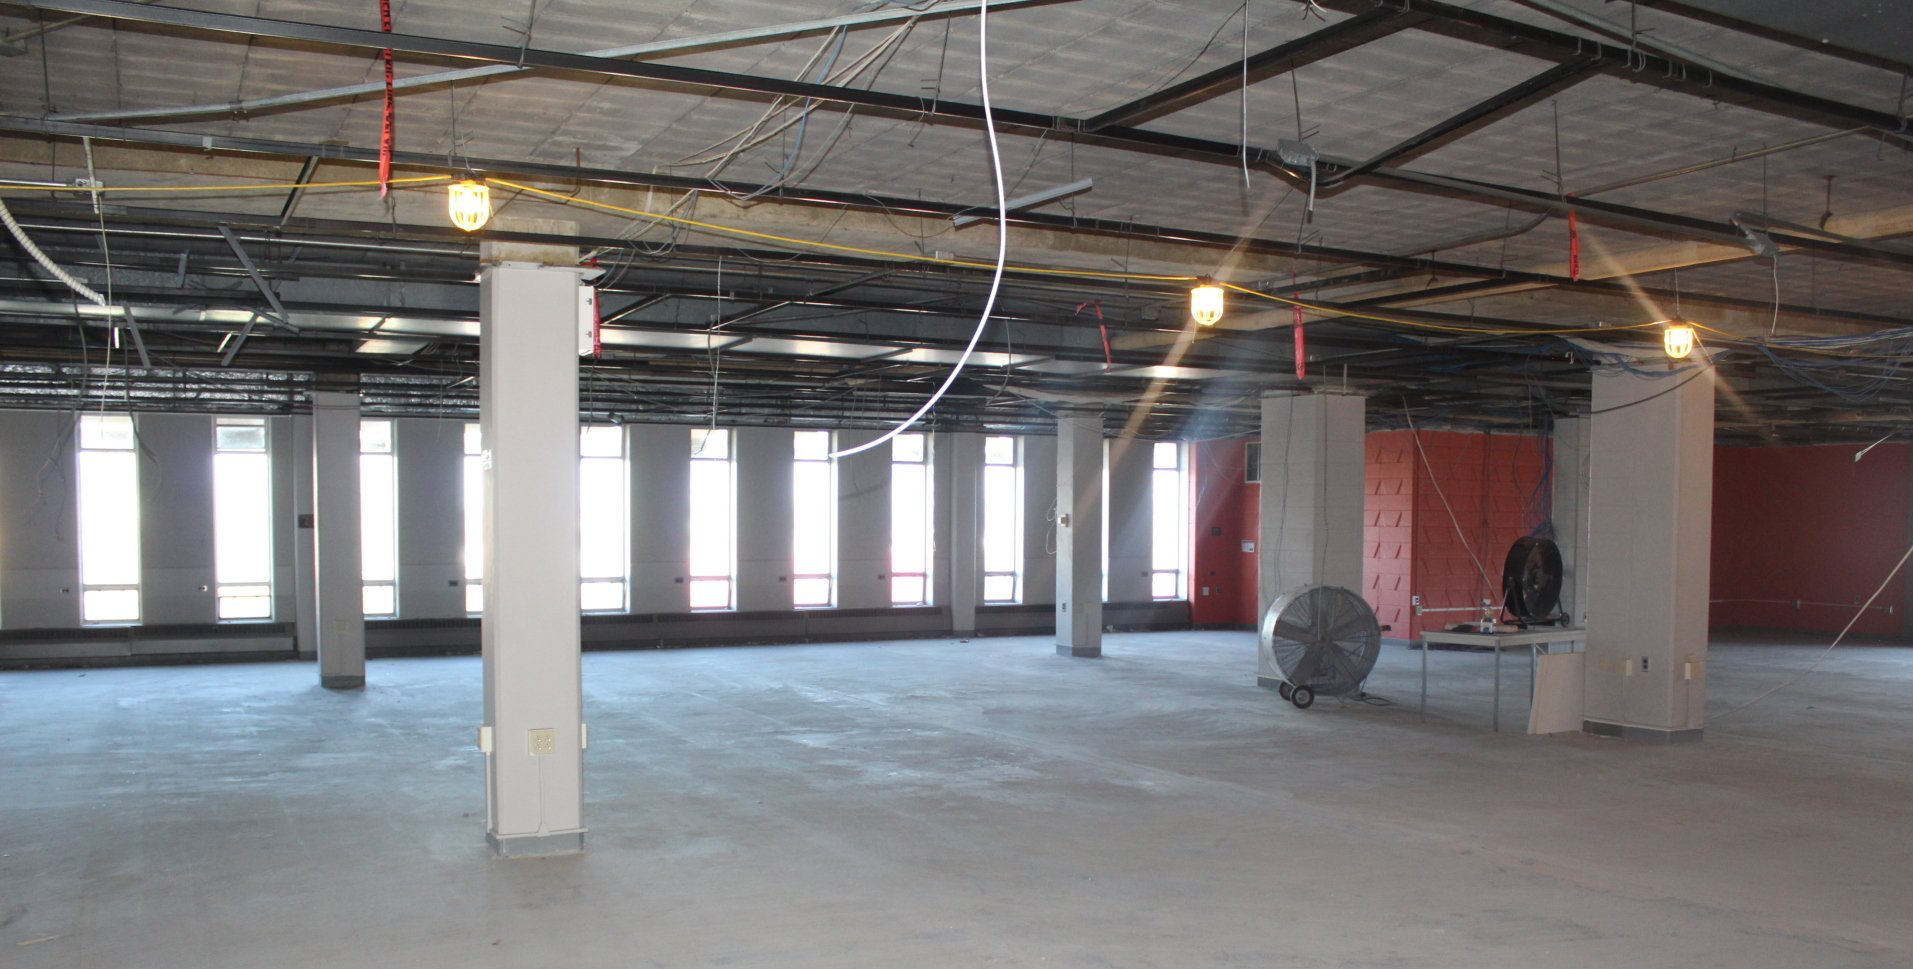 A large empty room with a lot of wires hanging from the ceiling.